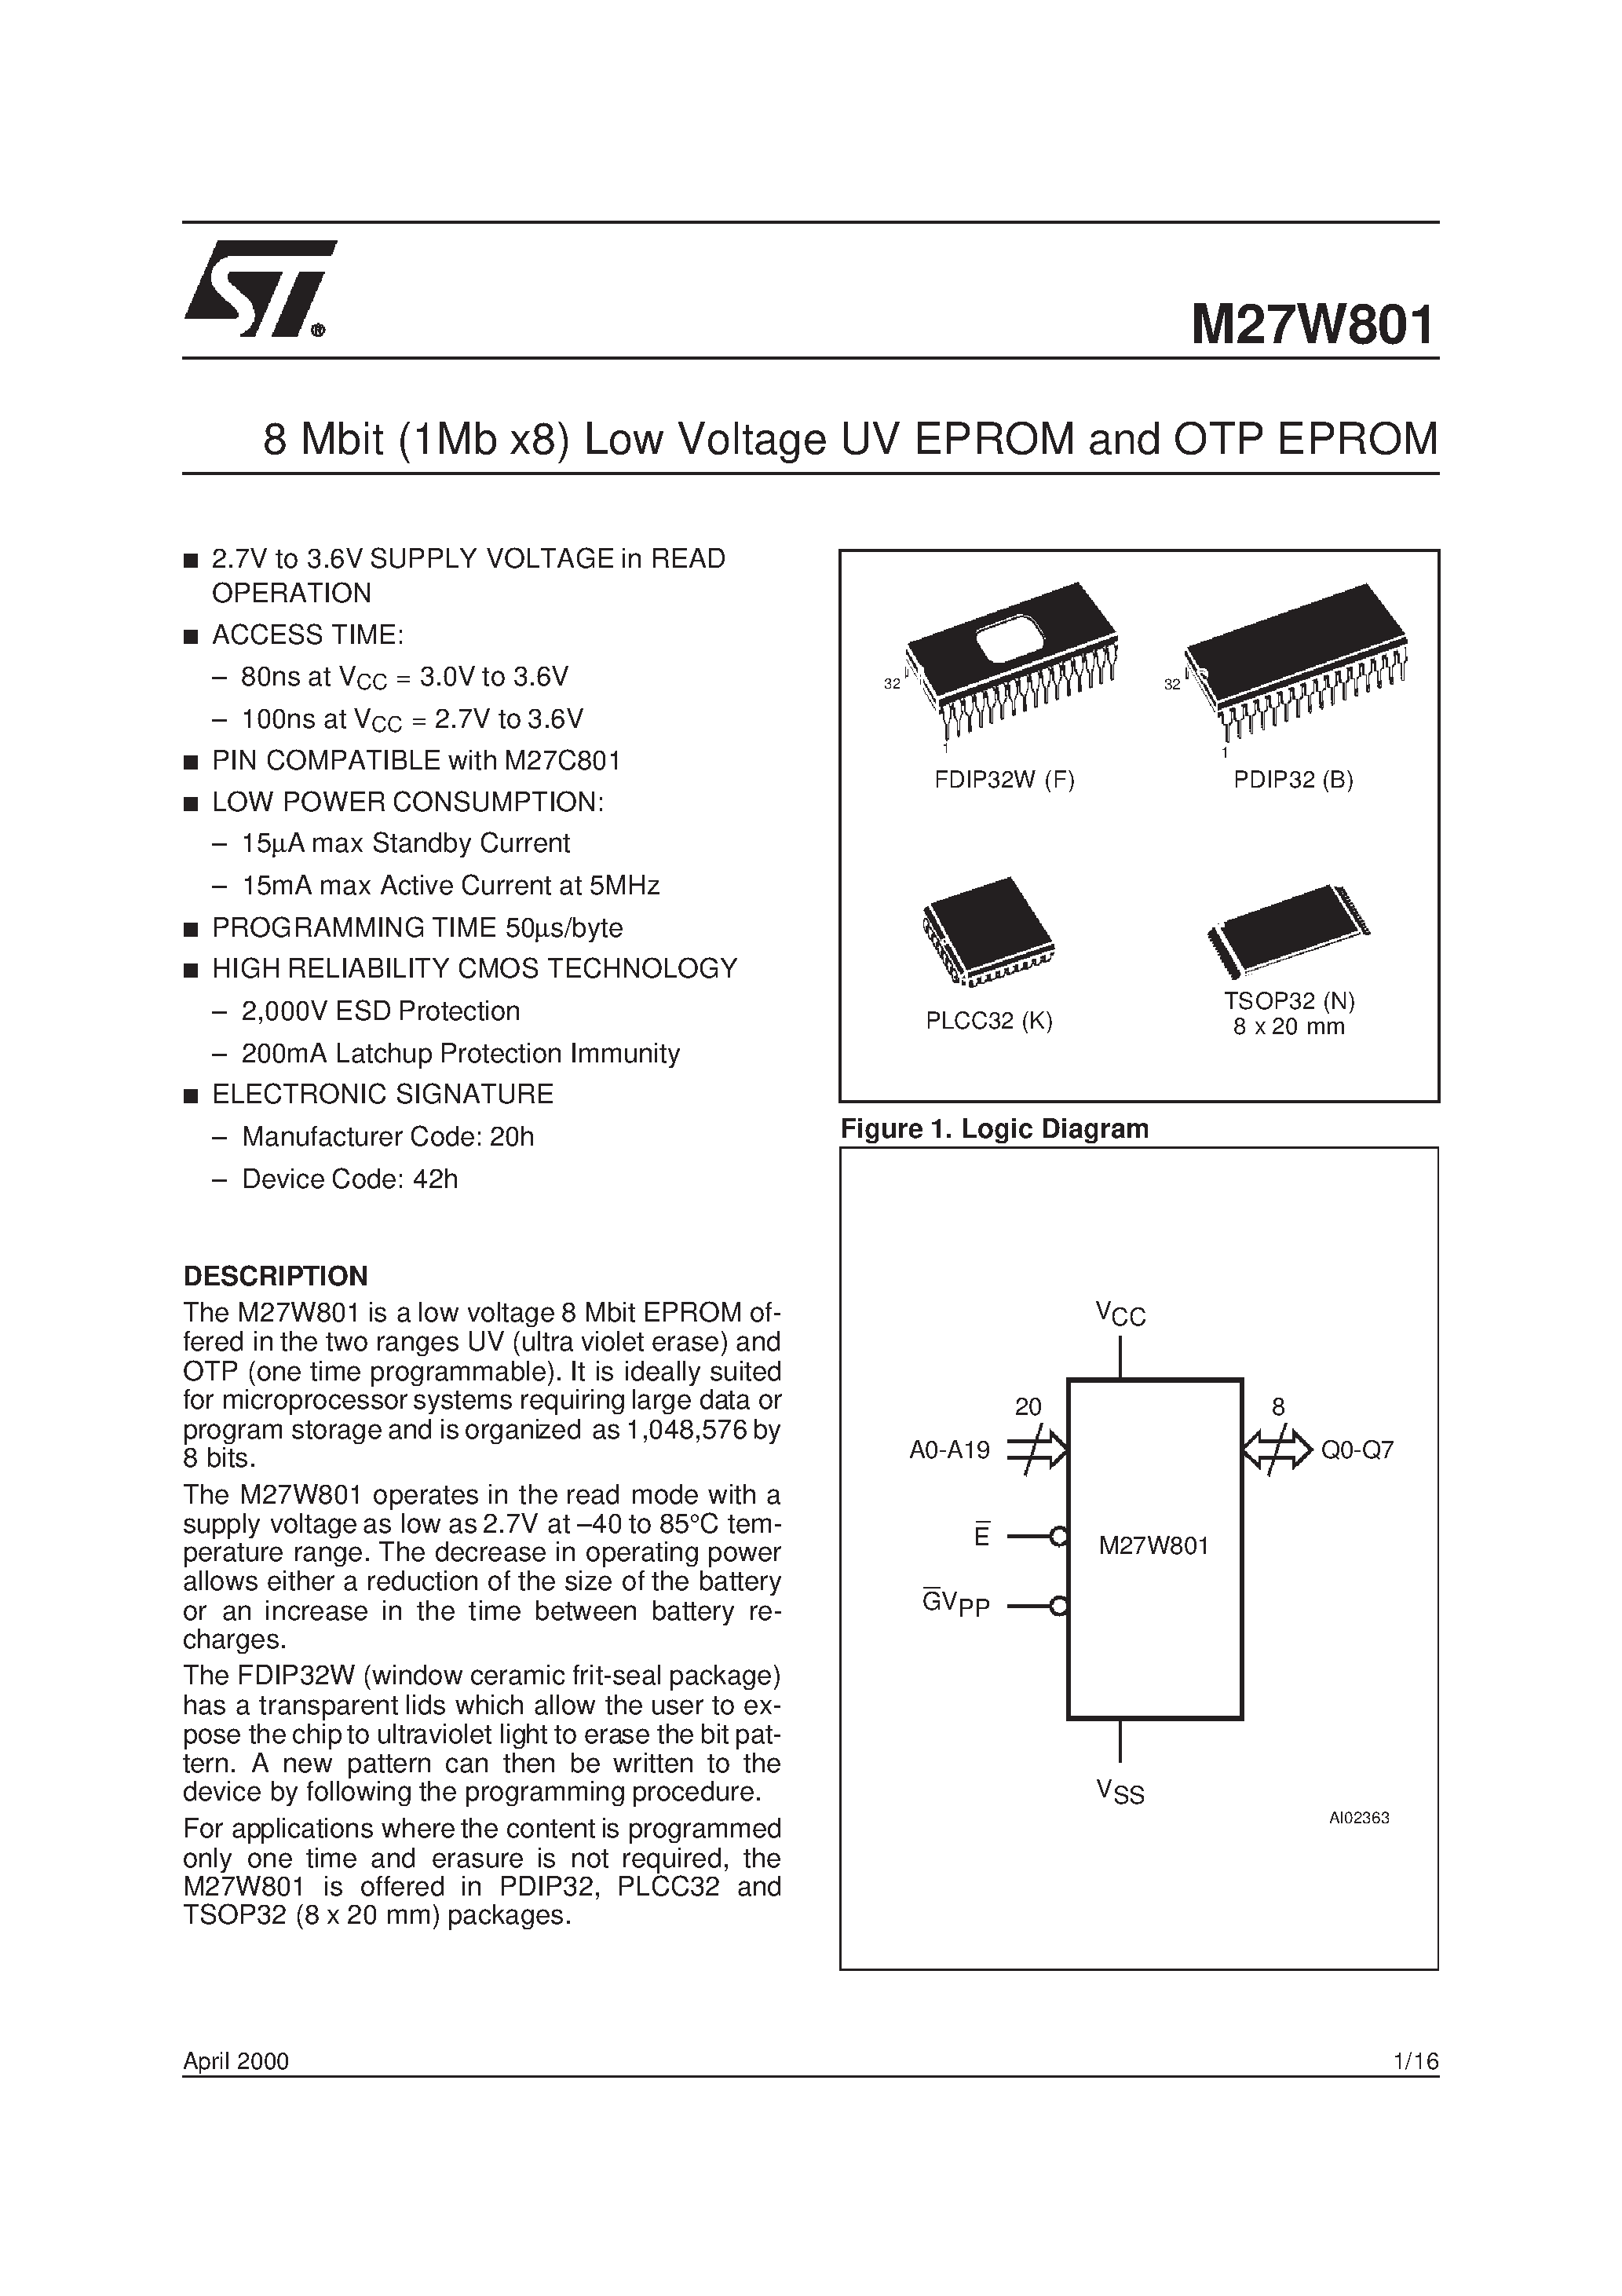 Datasheet M27W801-150B6TR - 8 Mbit 1Mb x8 Low Voltage UV EPROM and OTP EPROM page 1